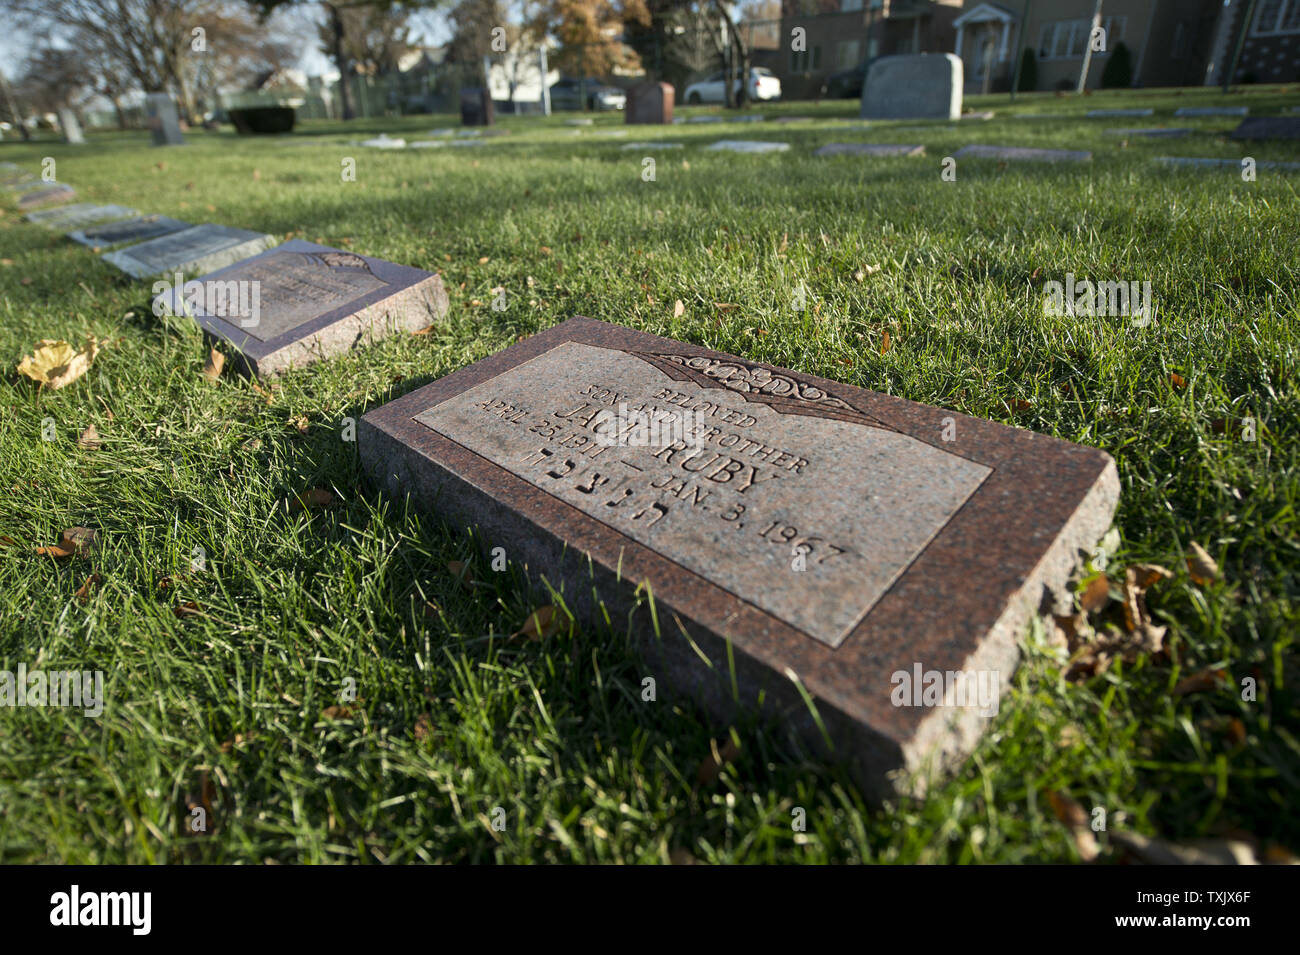 Jack Ruby's gravestone rests in Westlawn Cemetery in Norridge, Illinois on  November 14, 2013. A live television audience watched as Ruby killed Lee  Harvey Oswald, accused assassin of President John F. Kennedy,